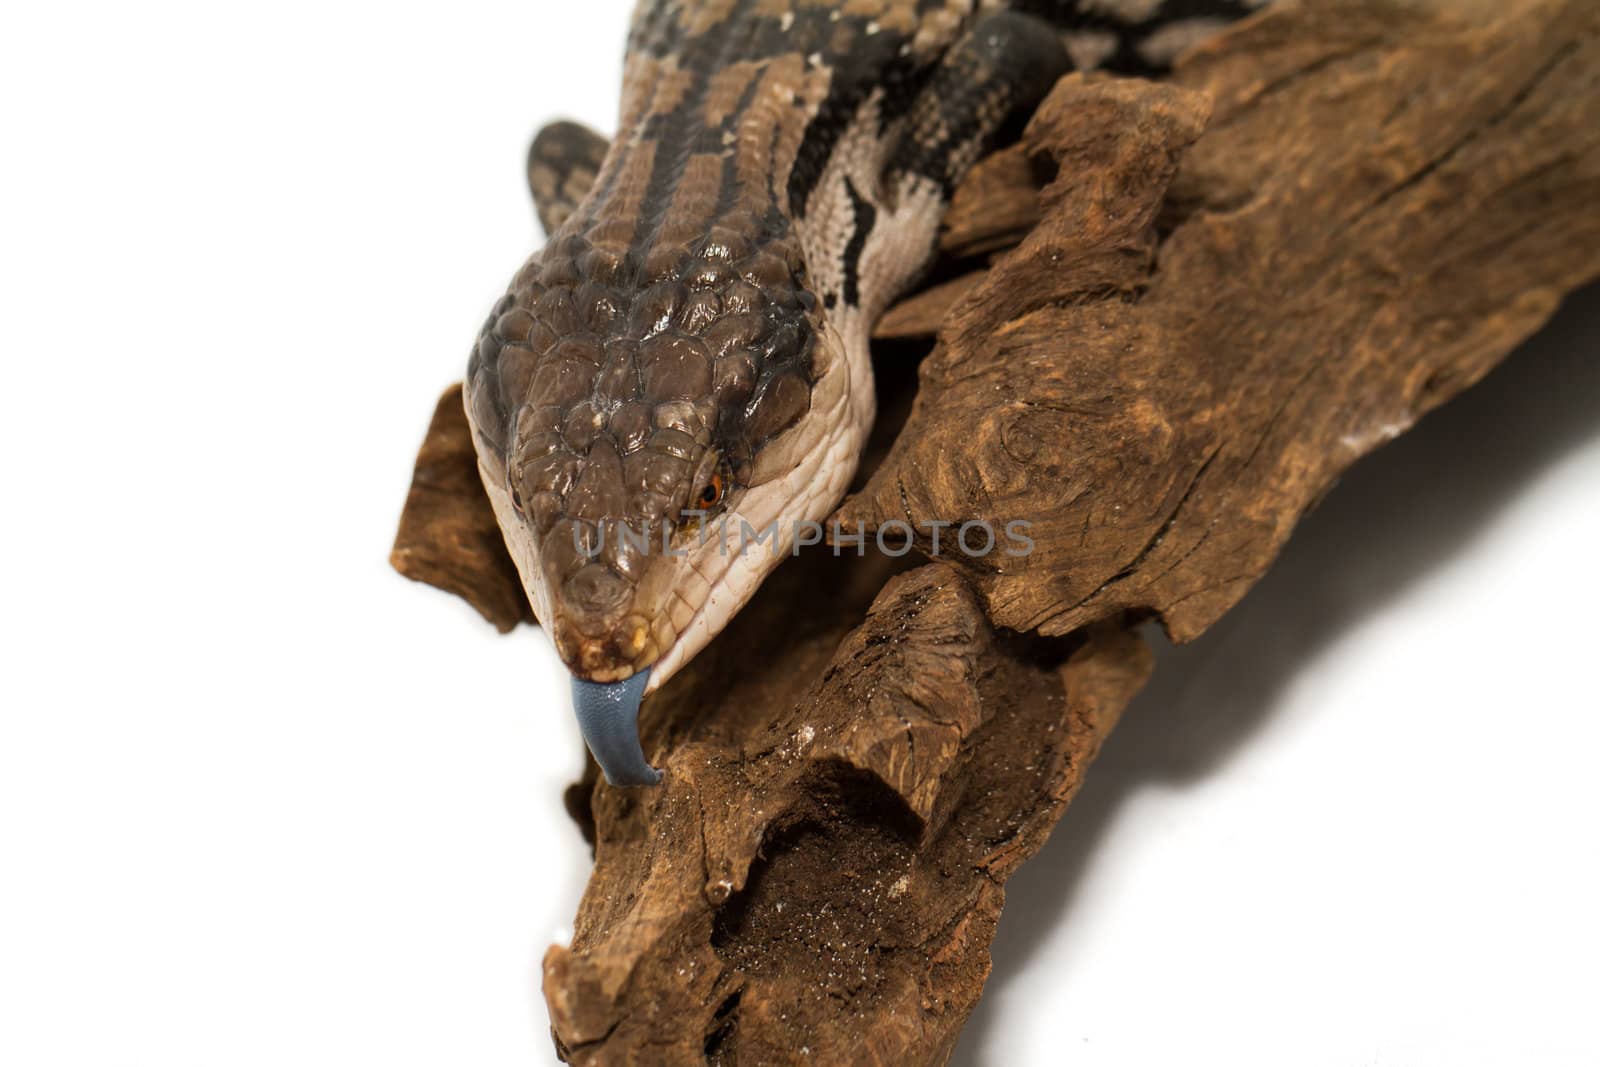 Blue tongued skink on white background (Tiliqua scincoides scincoides) by NagyDodo